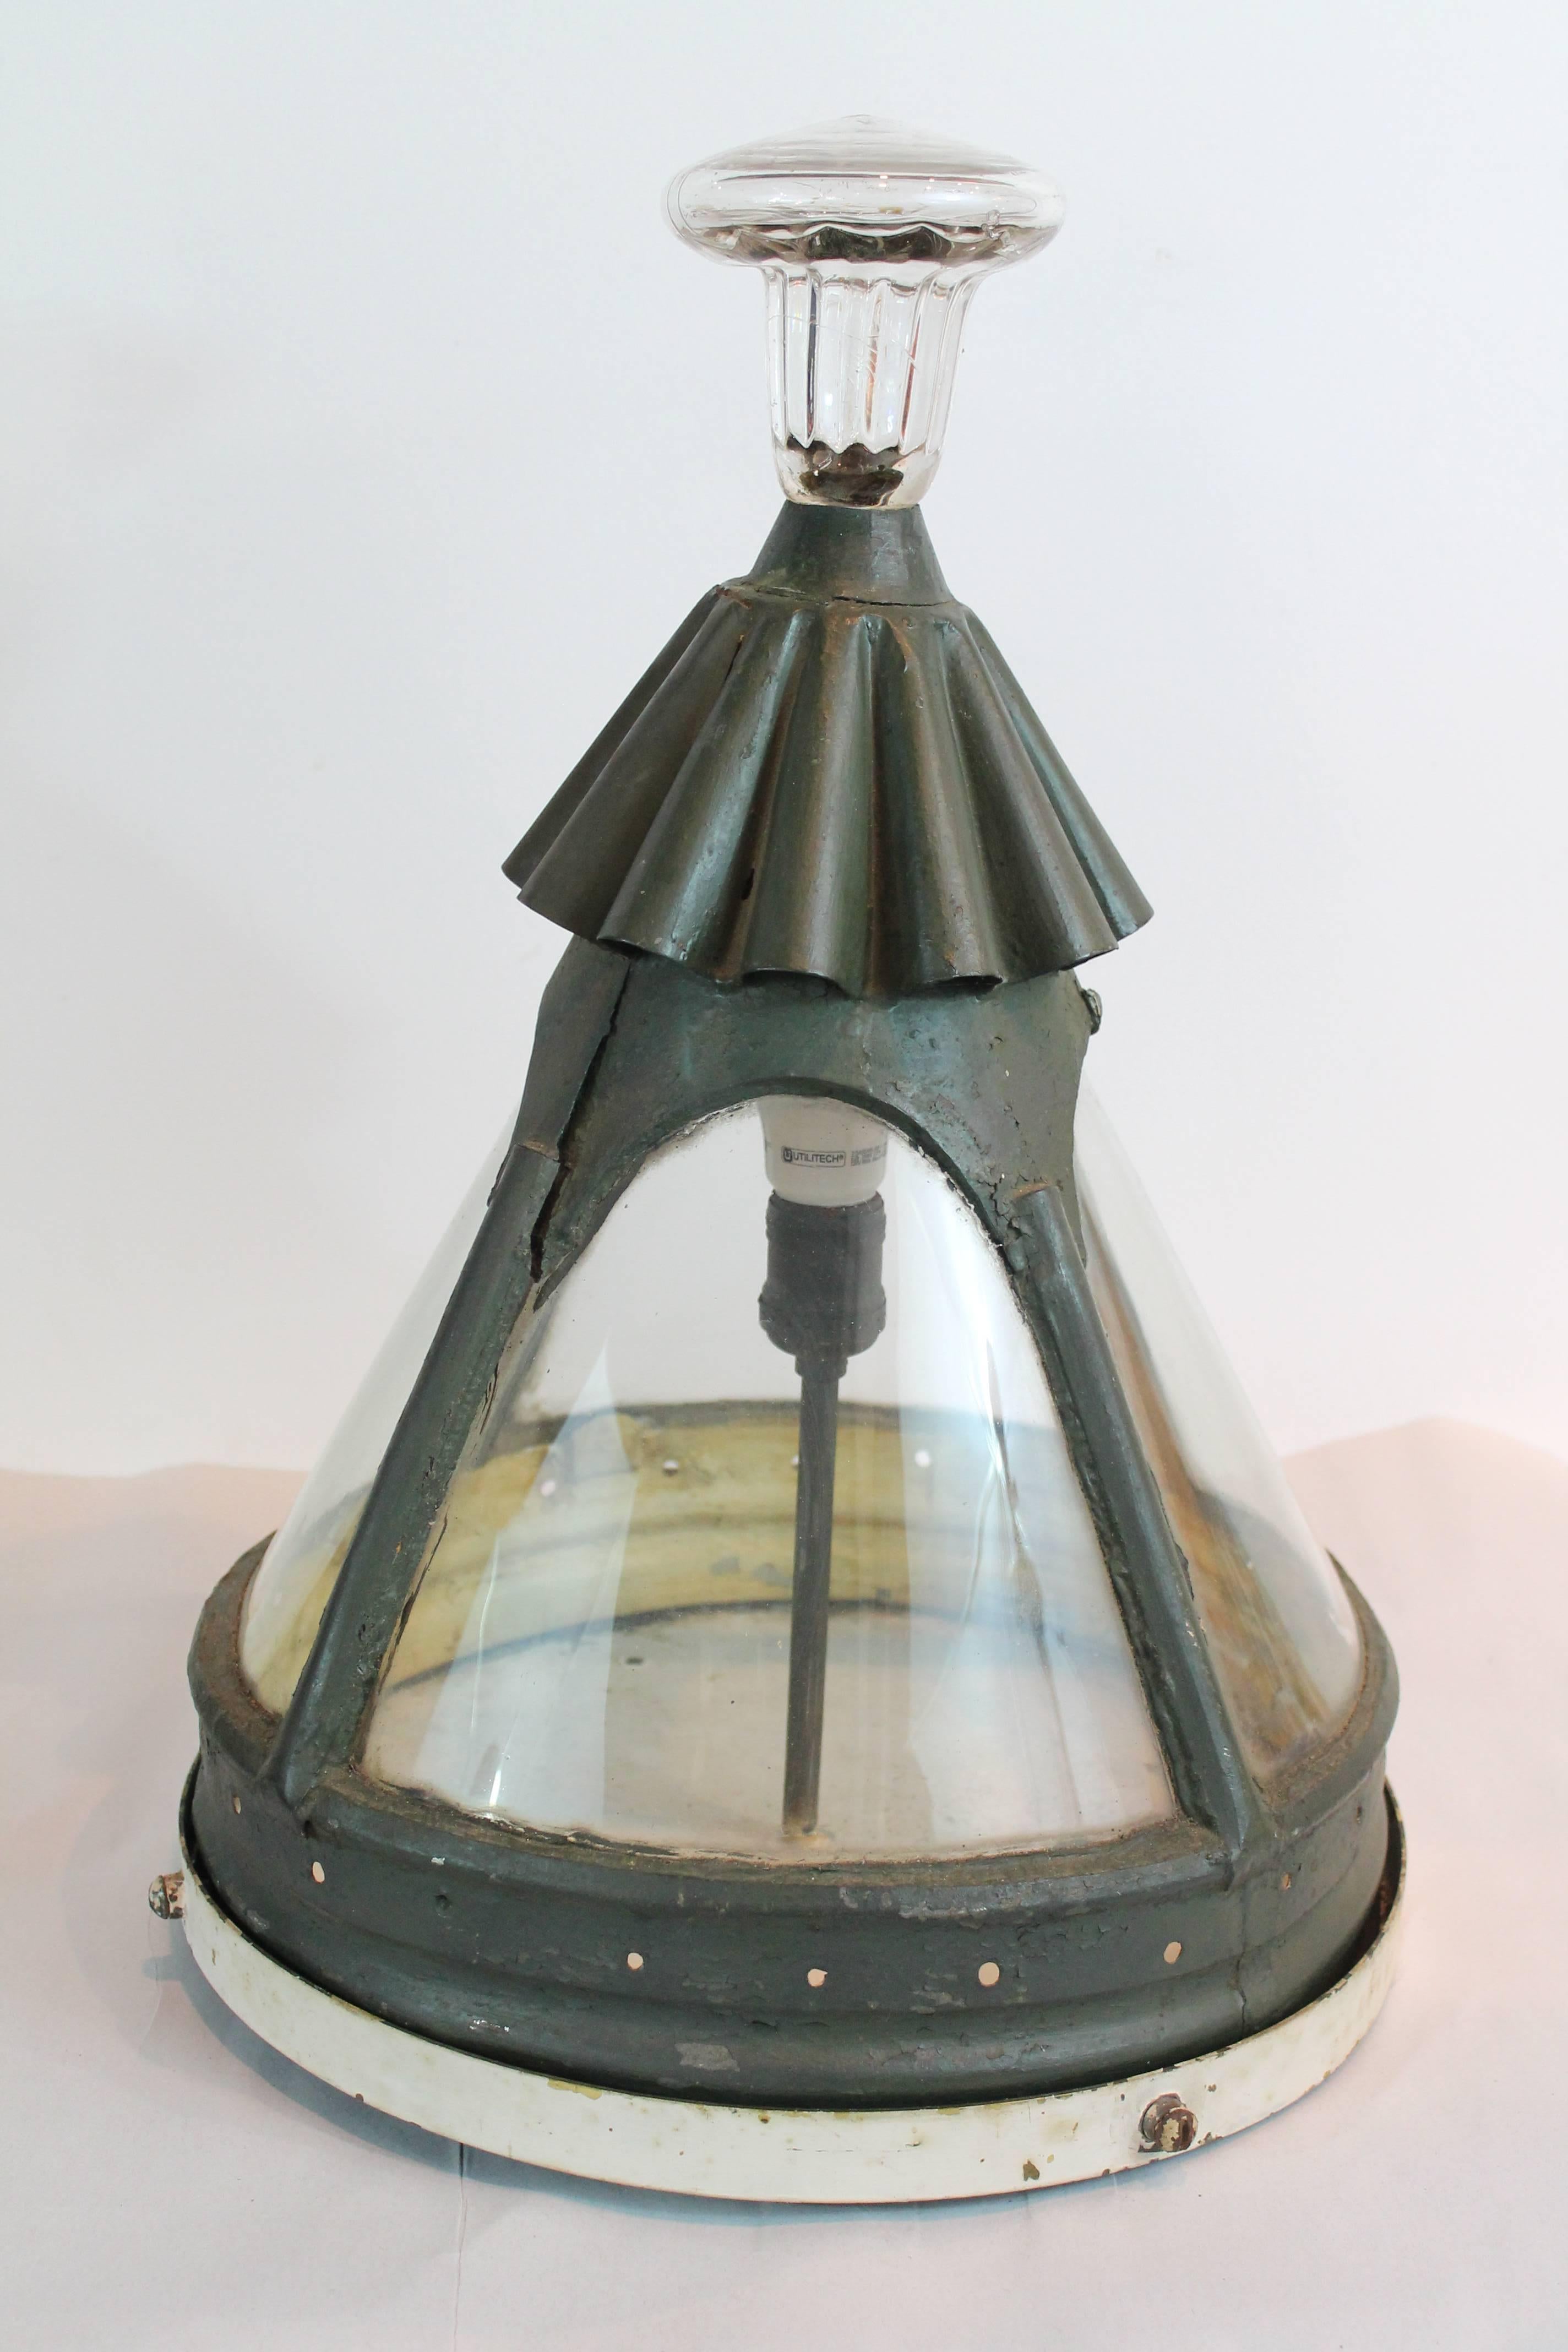 Very unusual sculptural 19th century painted iron and glass flush mount ceiling fixture. Featuring a fluted peak and a large glass finial. 
Could be use outdoor or indoor.